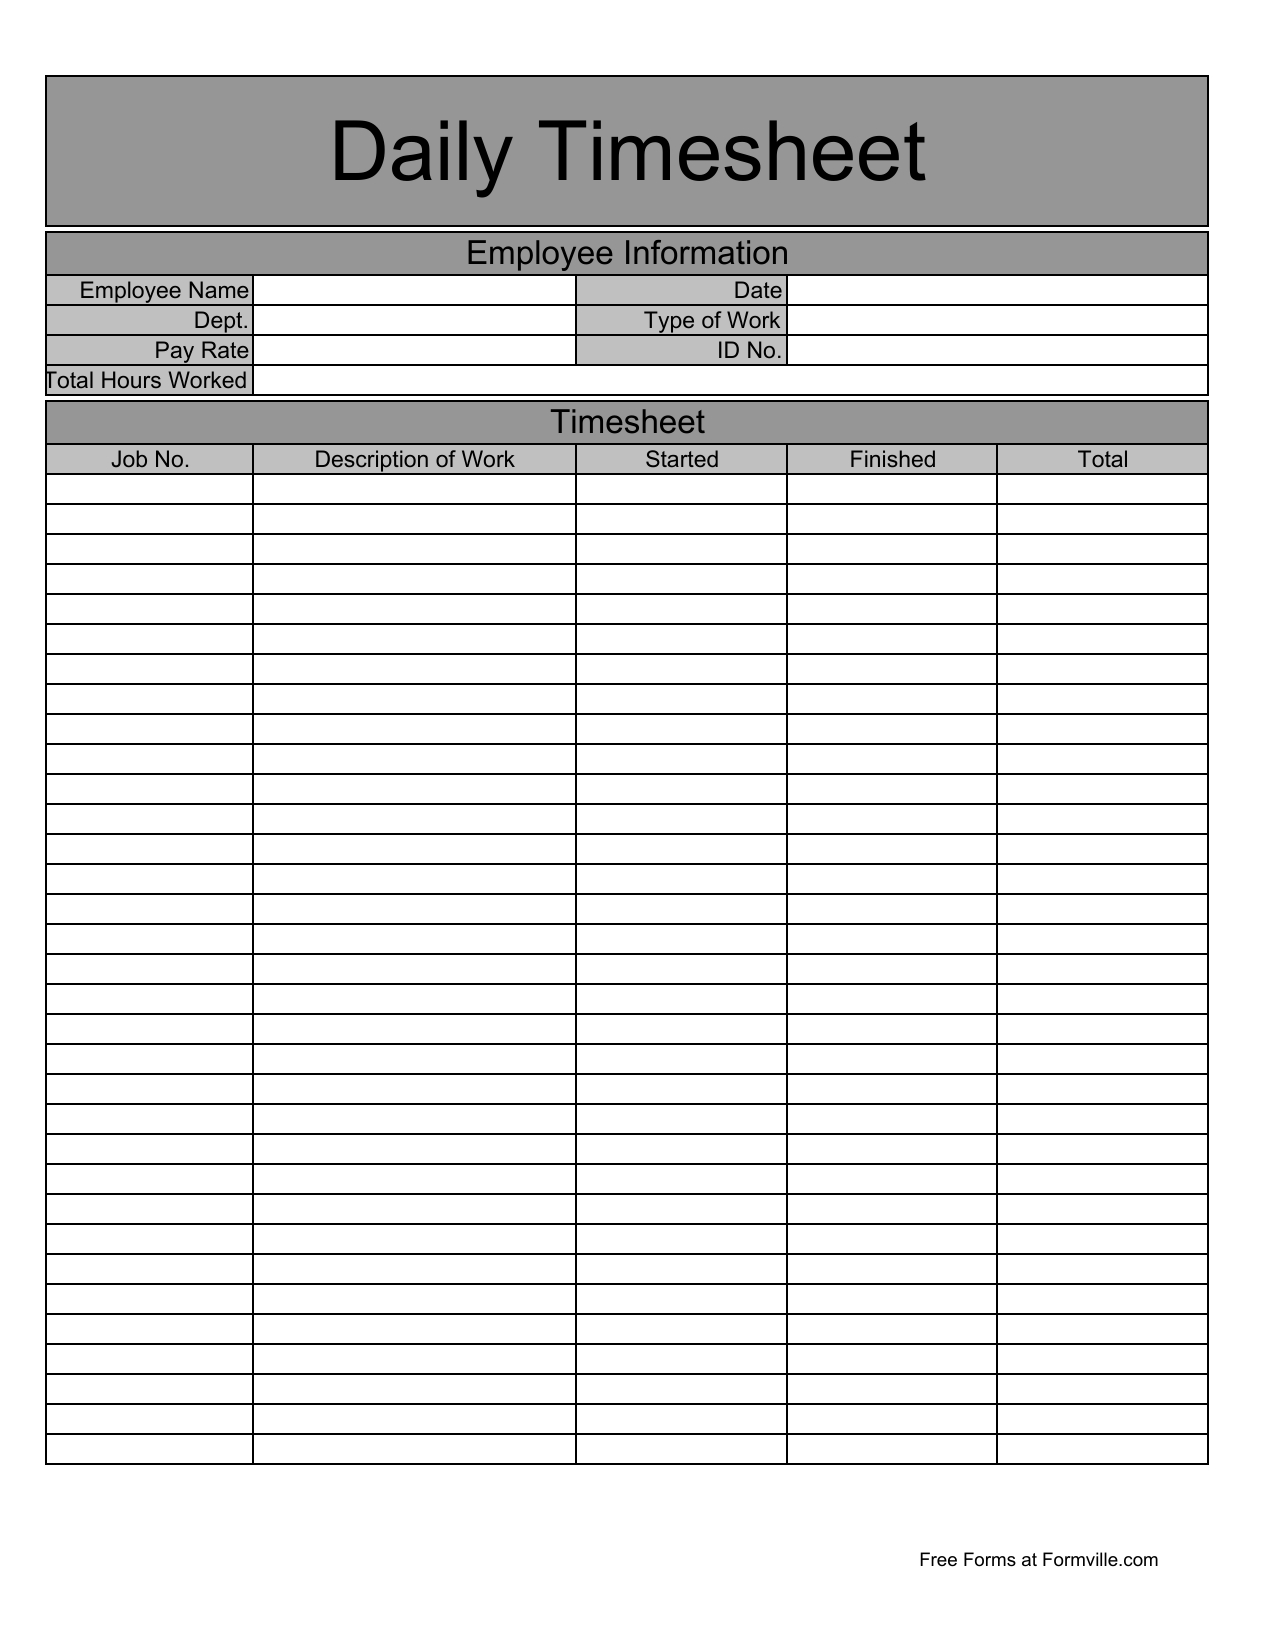 Download Daily Timesheet Template | Excel | Pdf | Rtf | Word - Free Printable Time Sheets Pdf